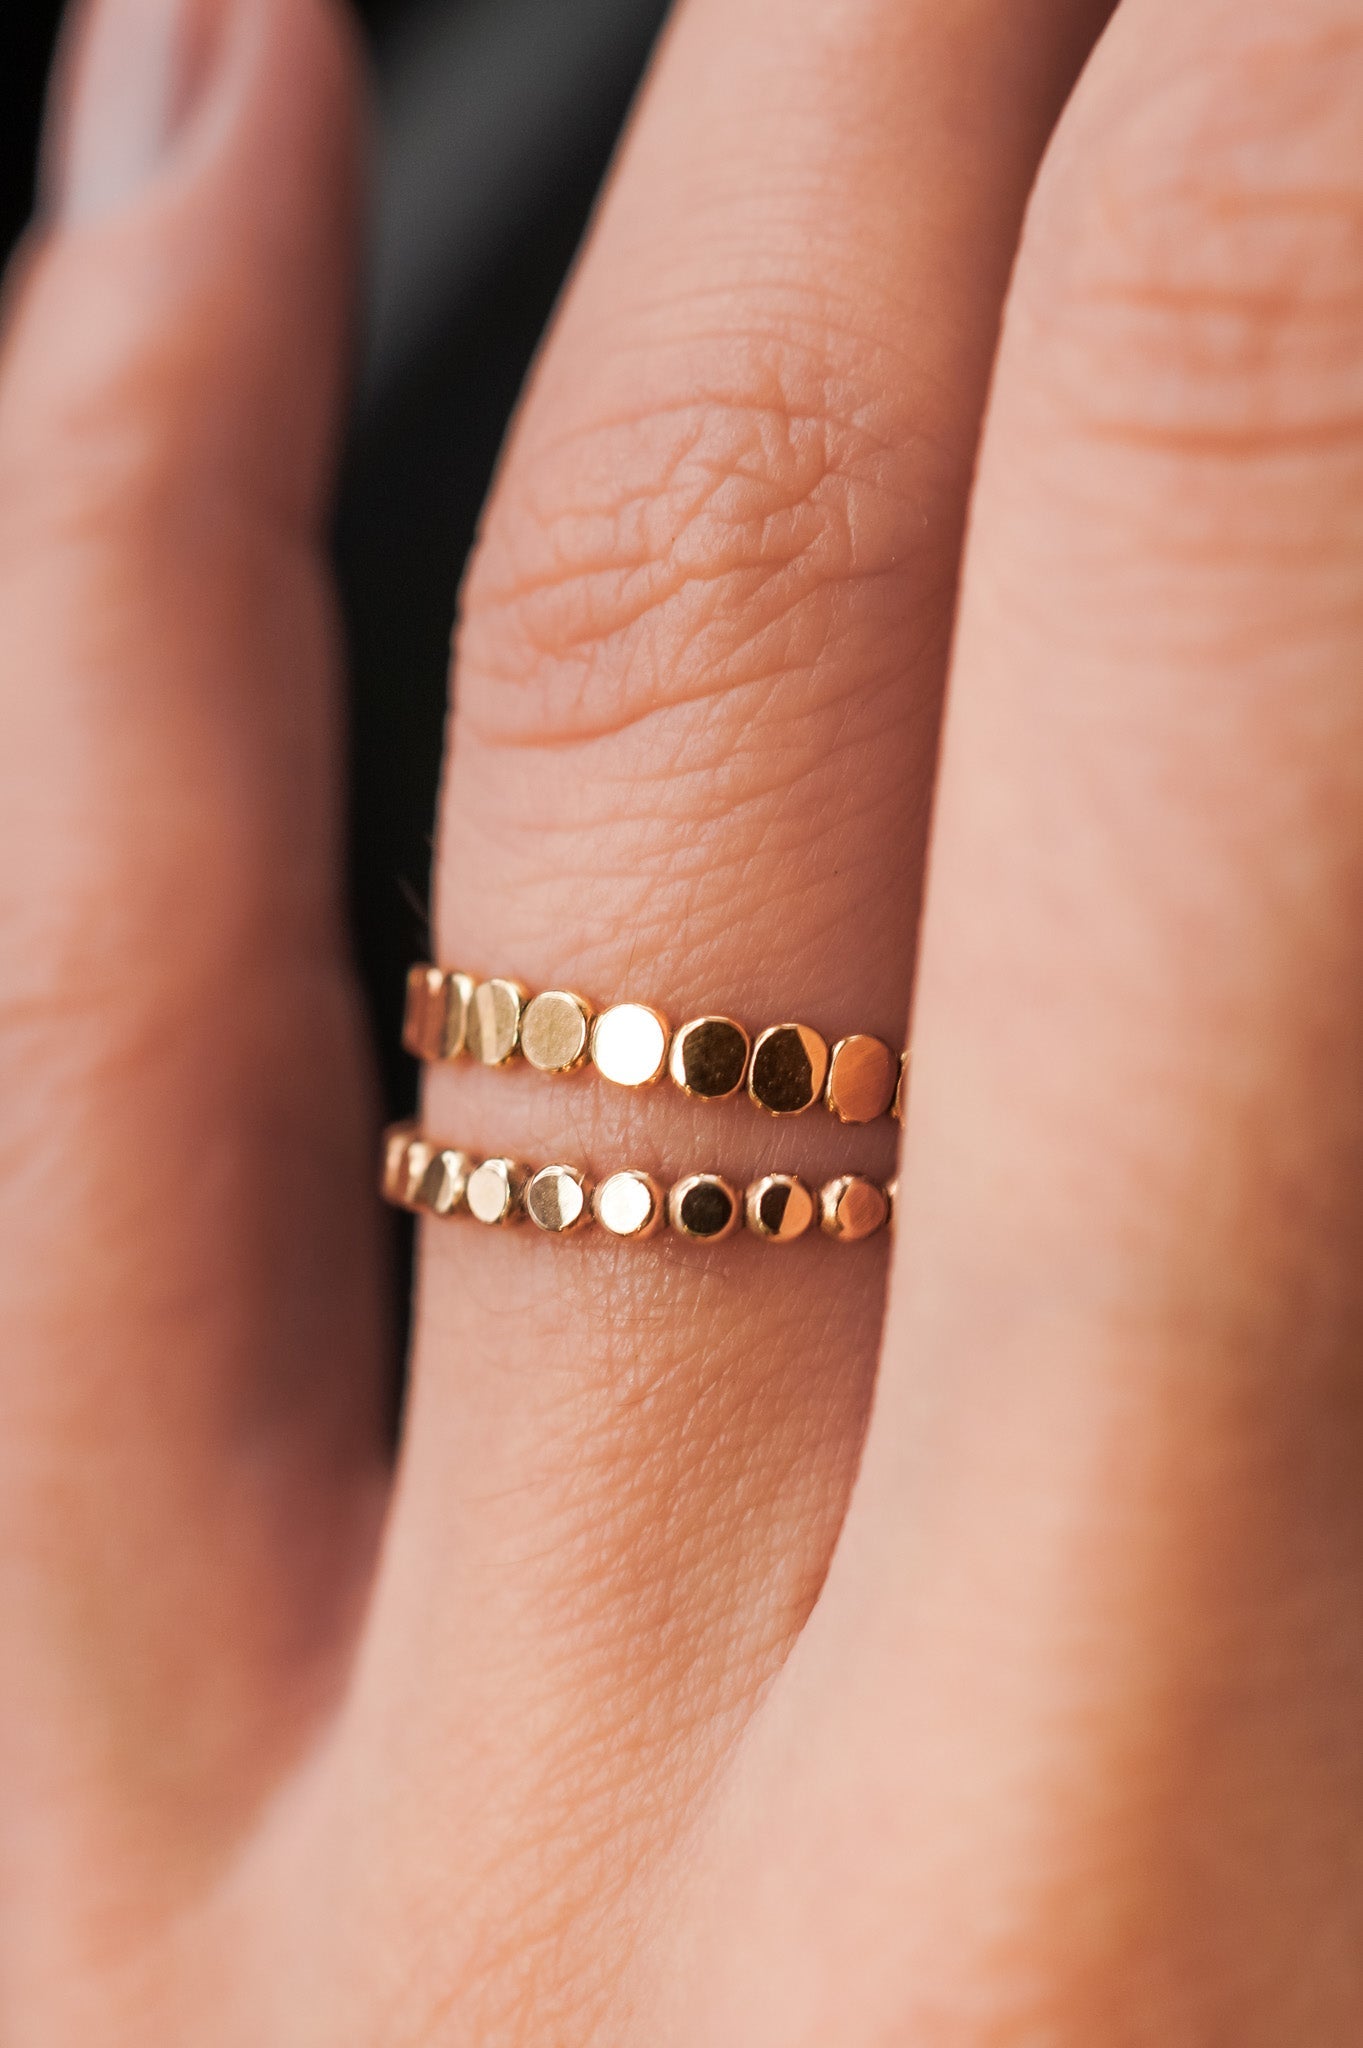 The Classic Mini Bead Set of 5 Stacking Rings, Gold Fill, Rose Gold Fill or Sterling Silver